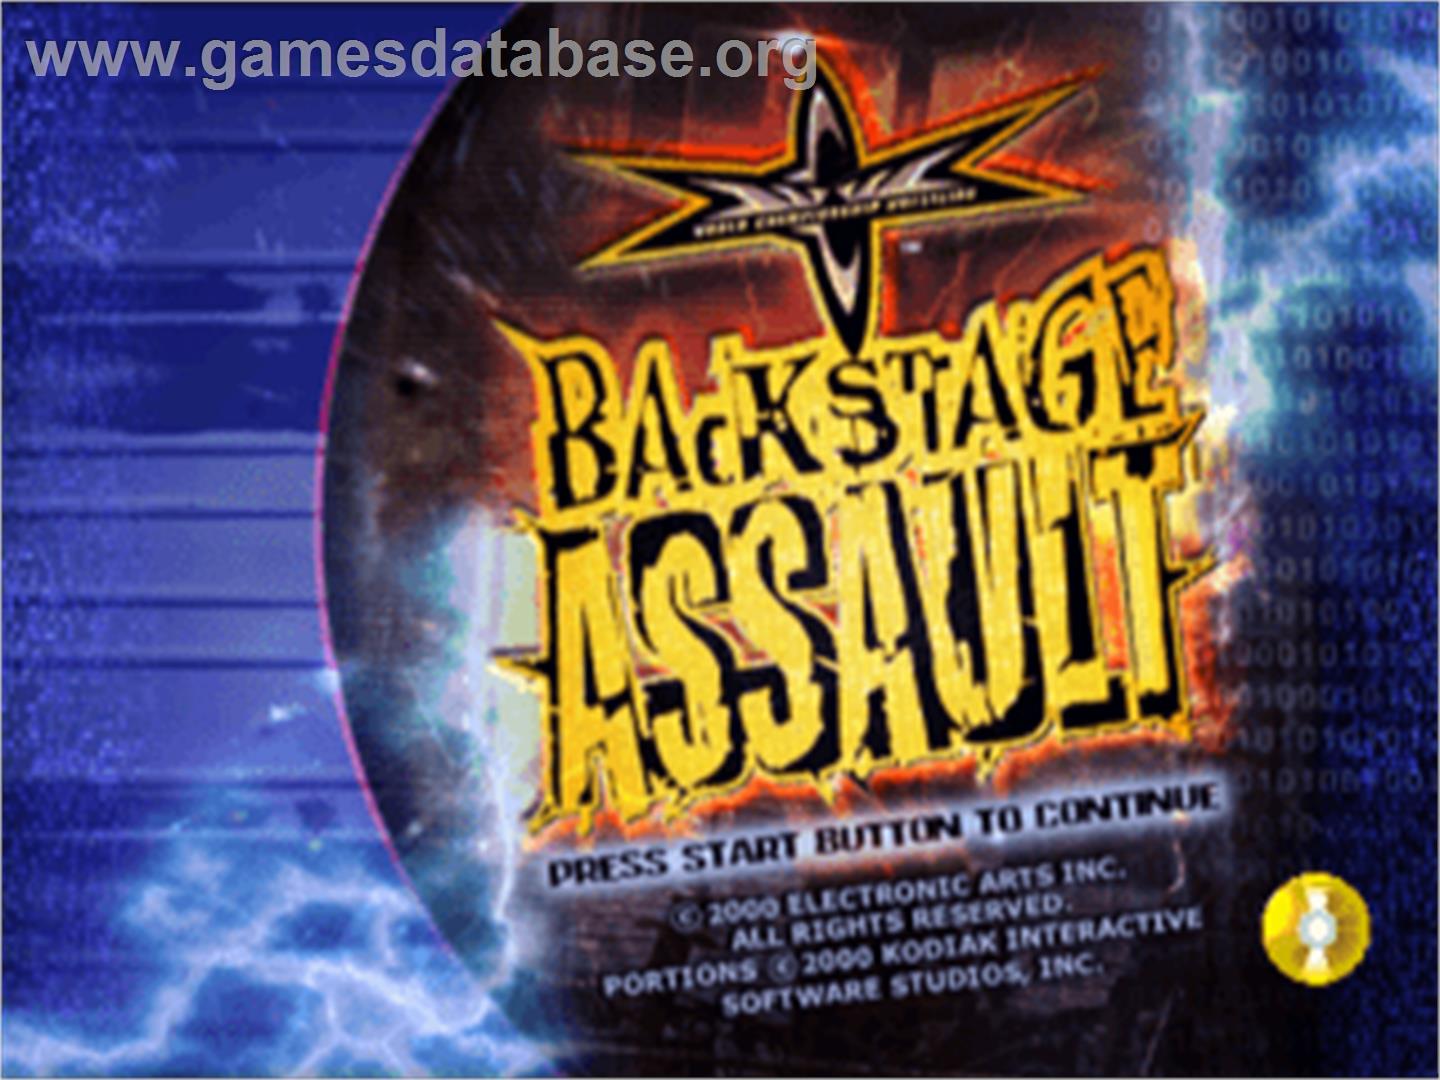 WCW Backstage Assault - Sony Playstation - Artwork - Title Screen